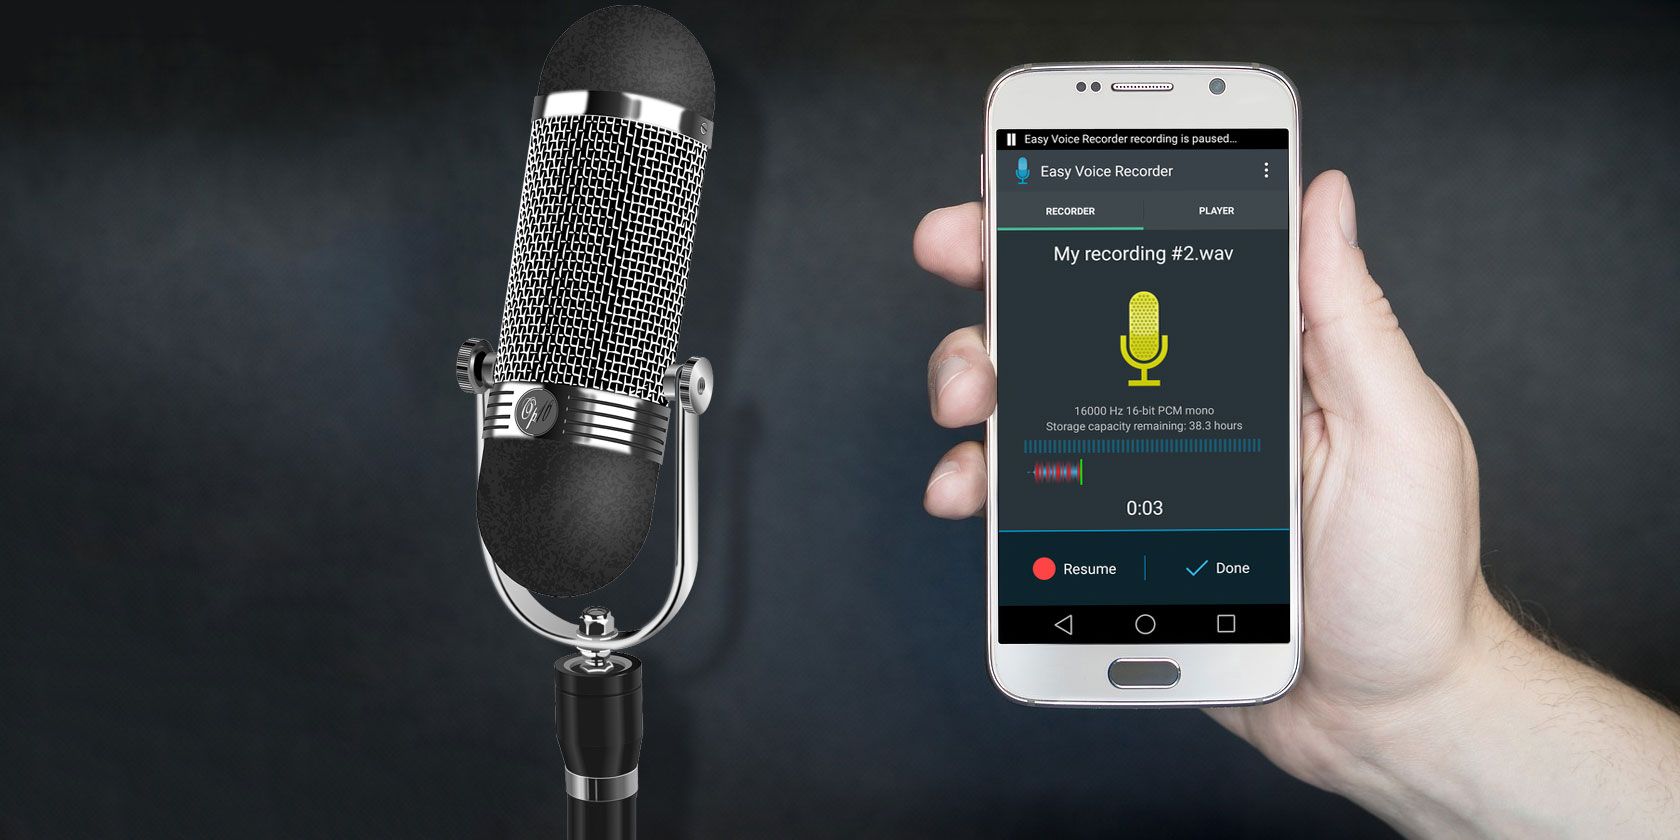 Bi overførsel forlade How to Record Audio With a USB Microphone on Android